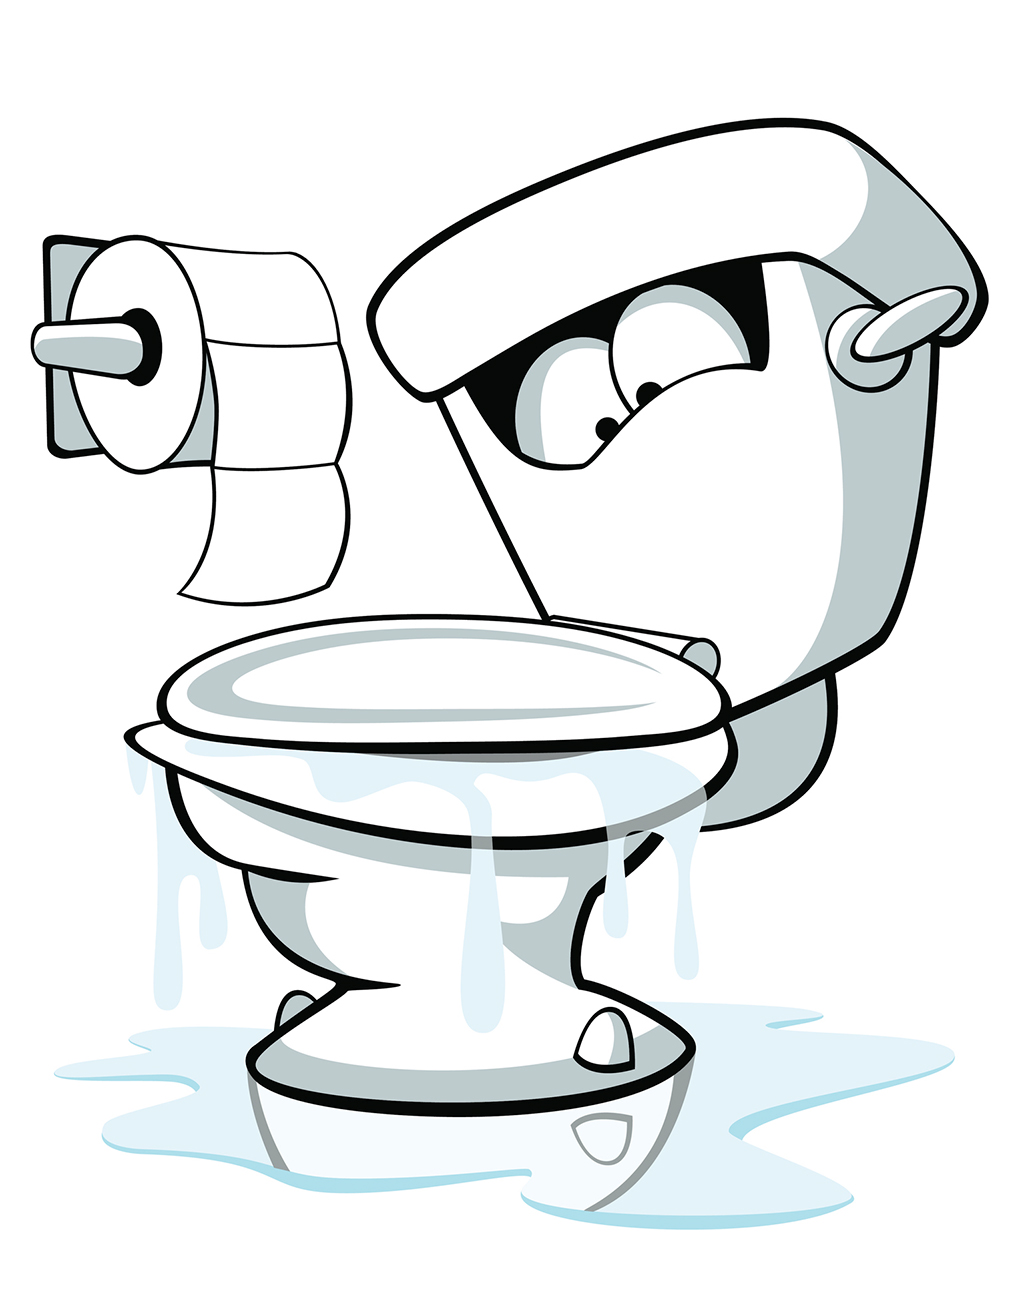 Need A Plumber? What To Do During A Plumbing Emergency | Cibolo, TX